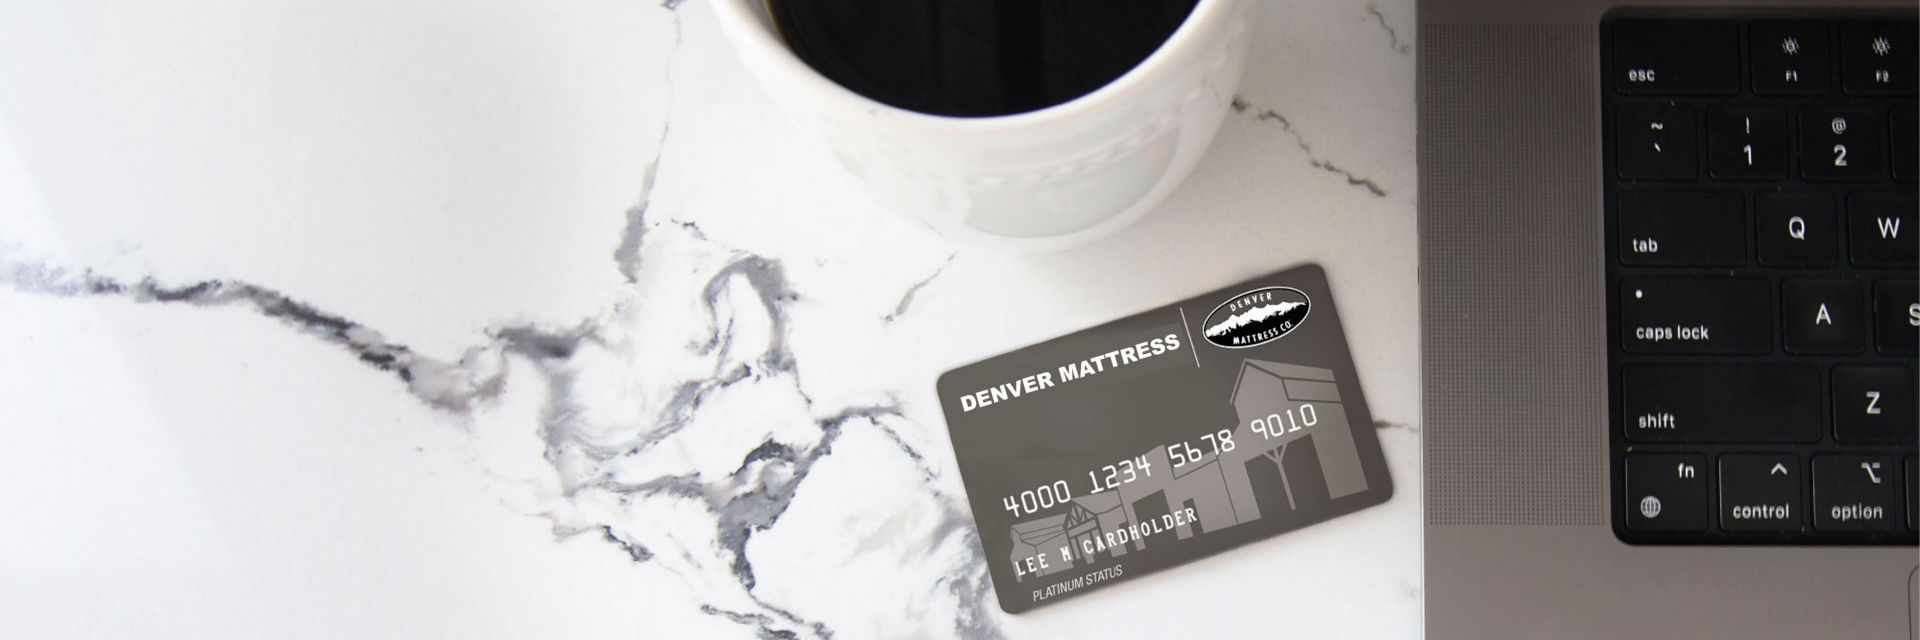 Financing Callout. Denver Mattress Card with Computer Keyboard and cup of coffee. 